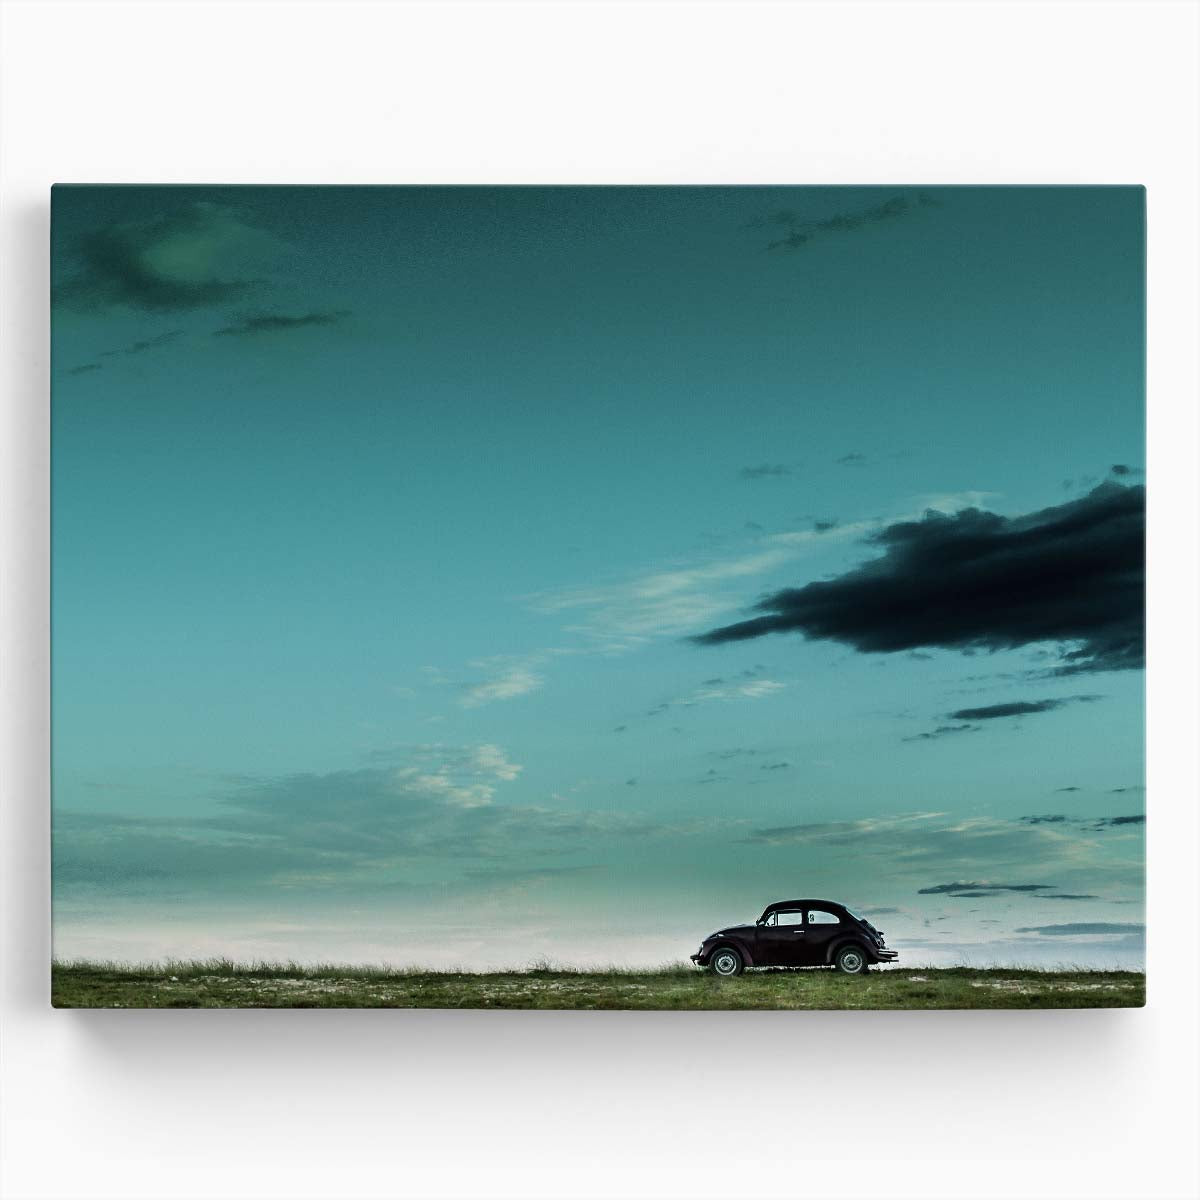 Vintage VW Beetle in Desolate Landscape Wall Art by Luxuriance Designs. Made in USA.